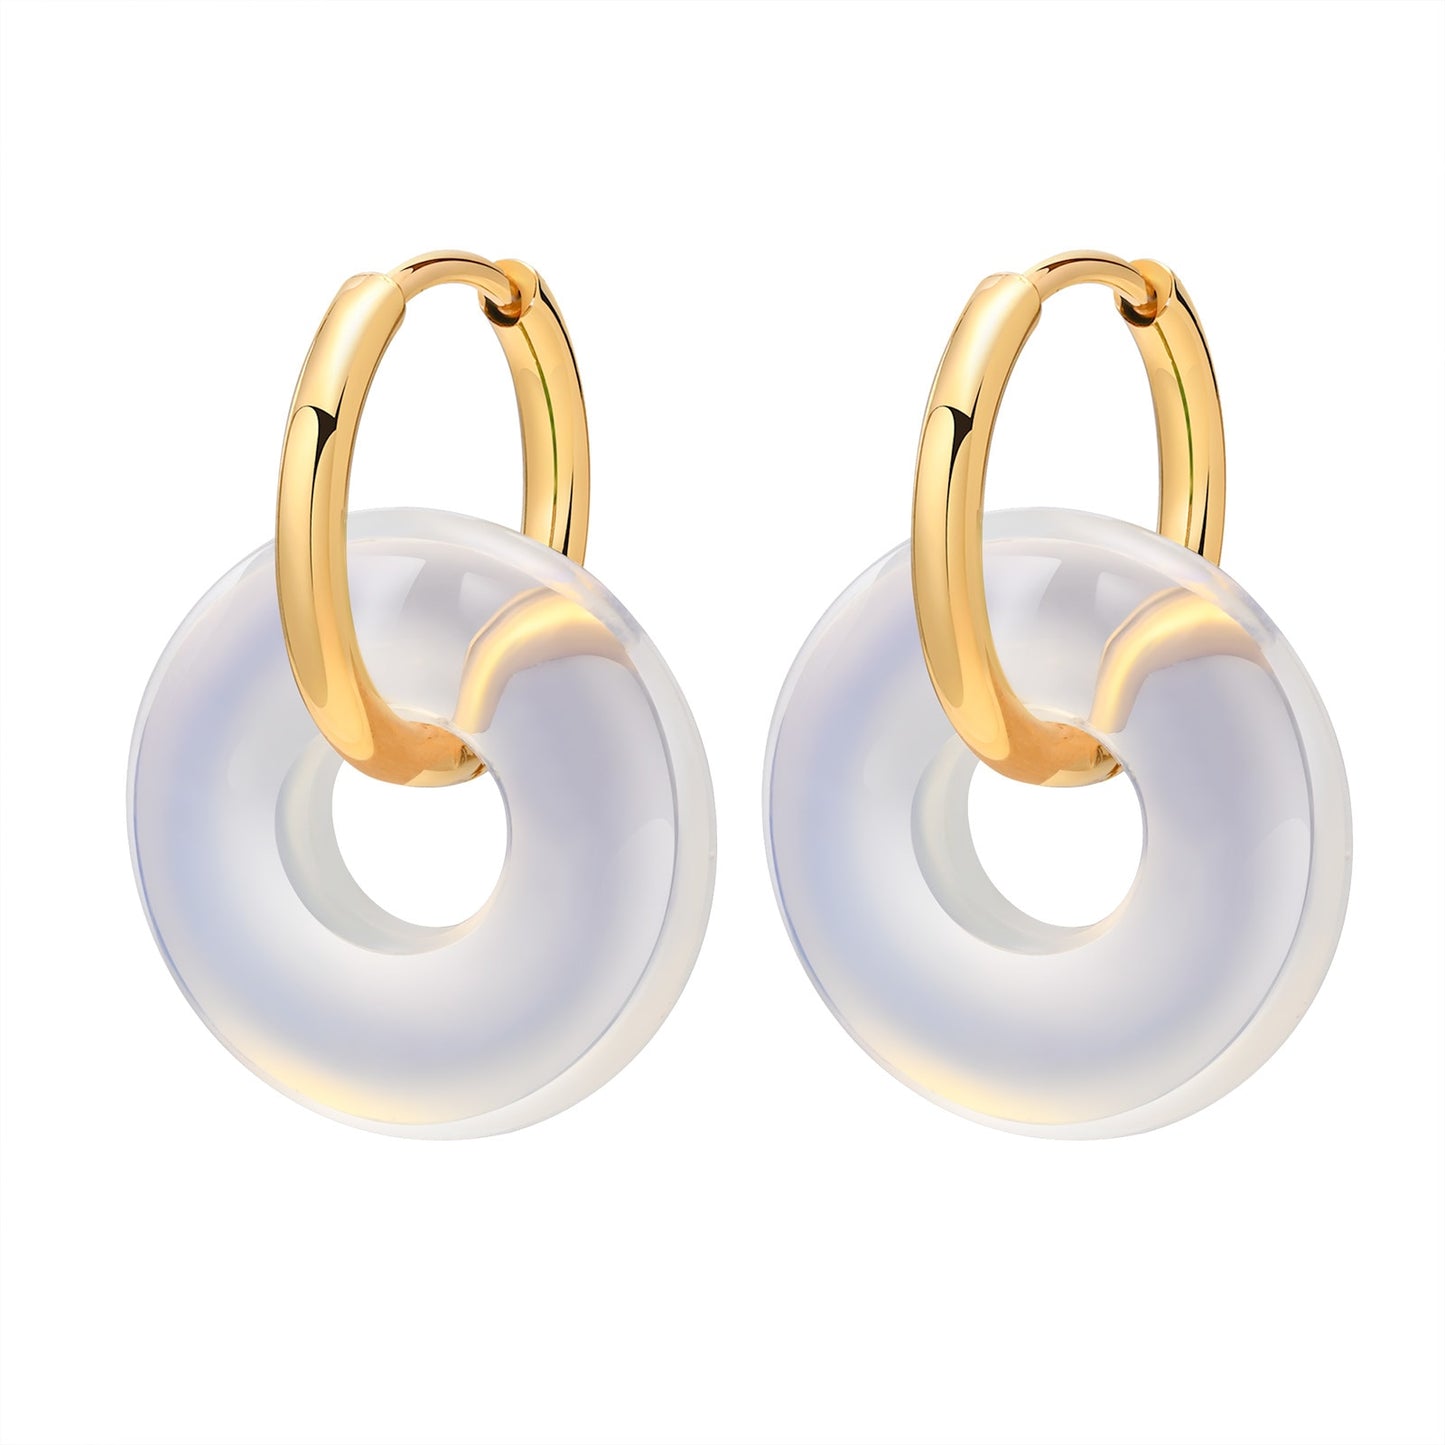 Aretes para mujeres Natural Stone Round Huggie Earrings for Women Fashion Jewelry, Gold Color Stainless Steel Ear Gifts Jewelry